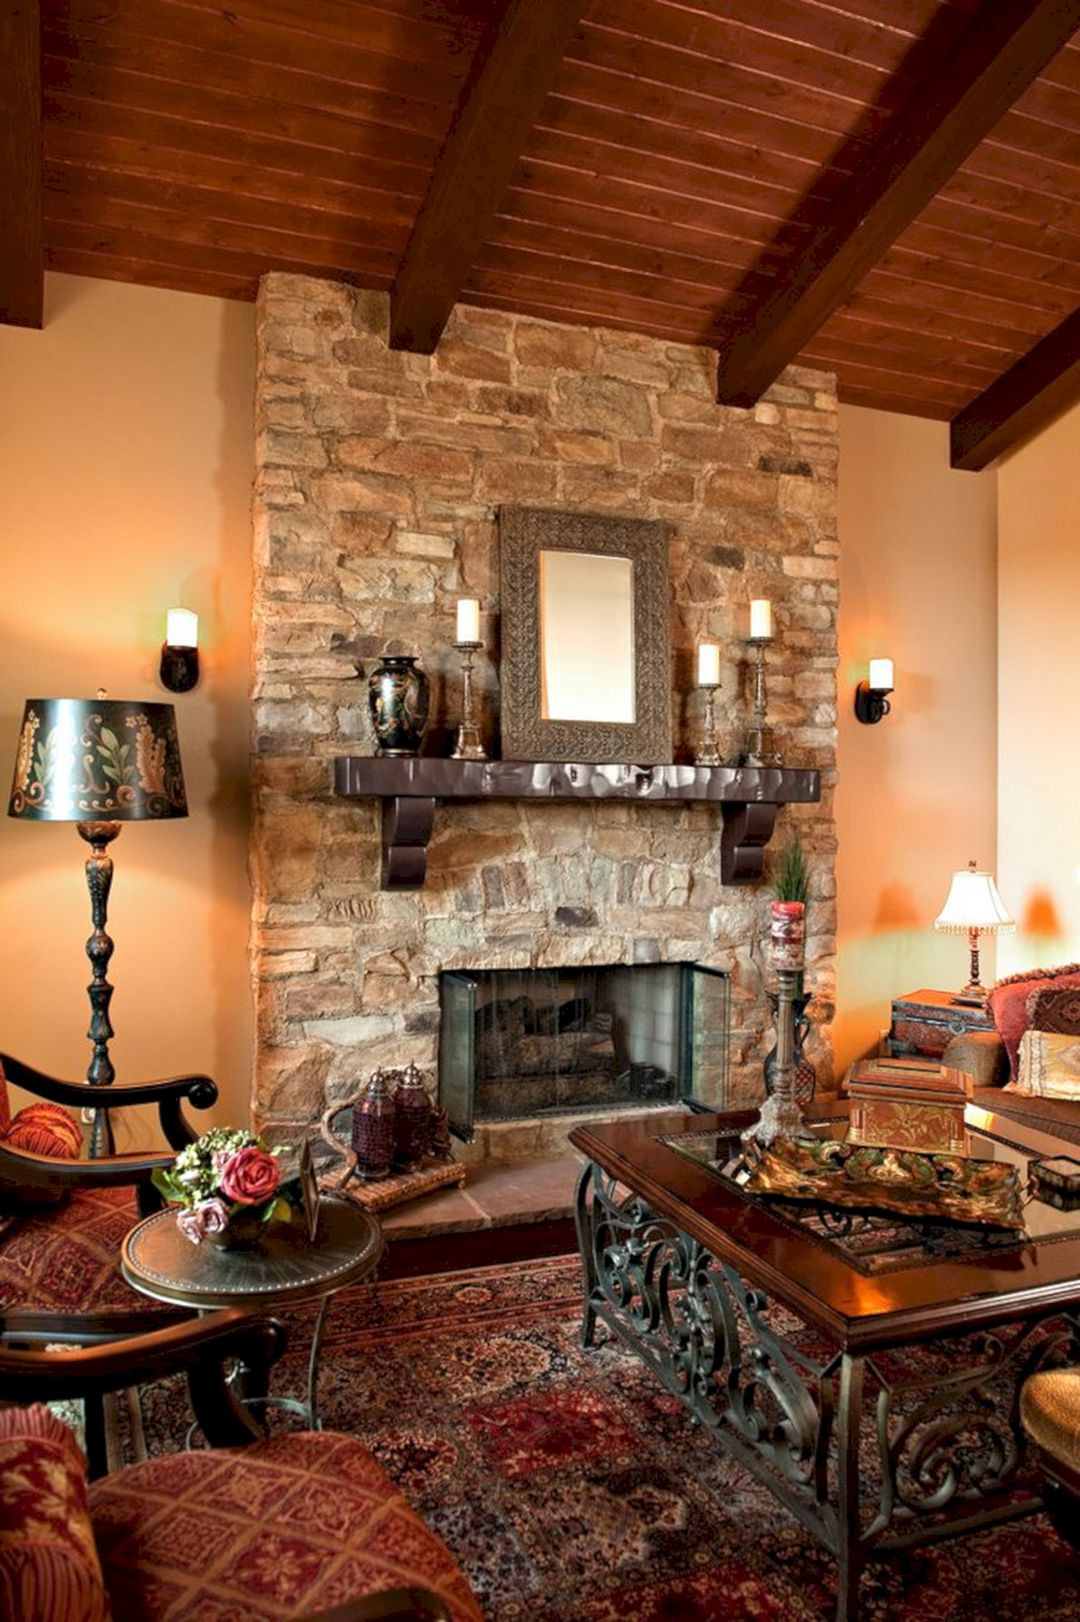 Rustic Living Rooms With Fireplace
 Rustic Living Room With Stone Fireplace Rustic Living